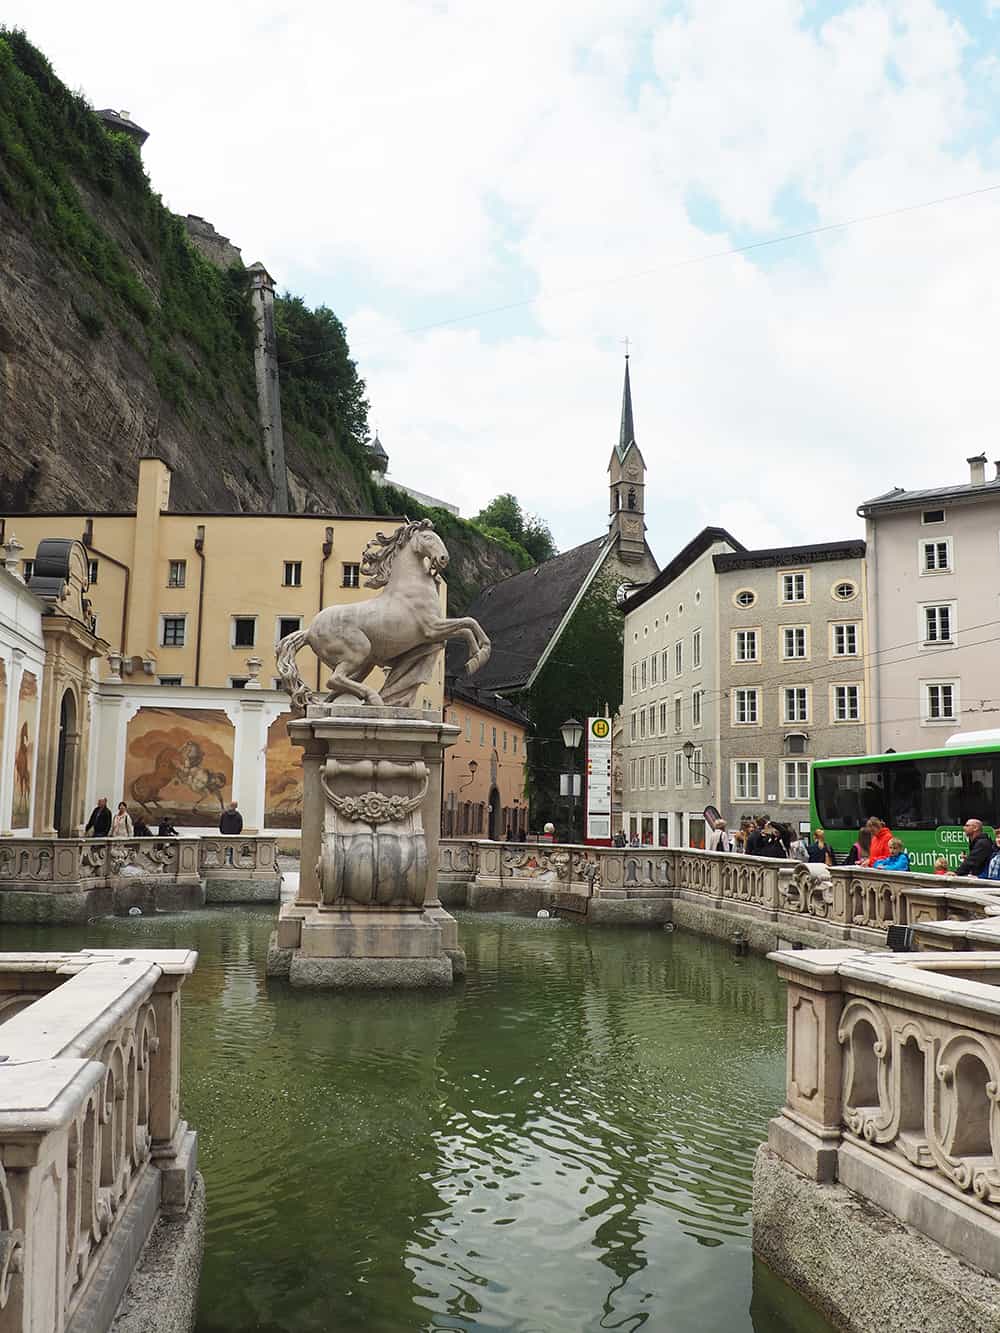 Sites and scenes from our walking tour of Salzburg, Austria. | via Autumn All Along